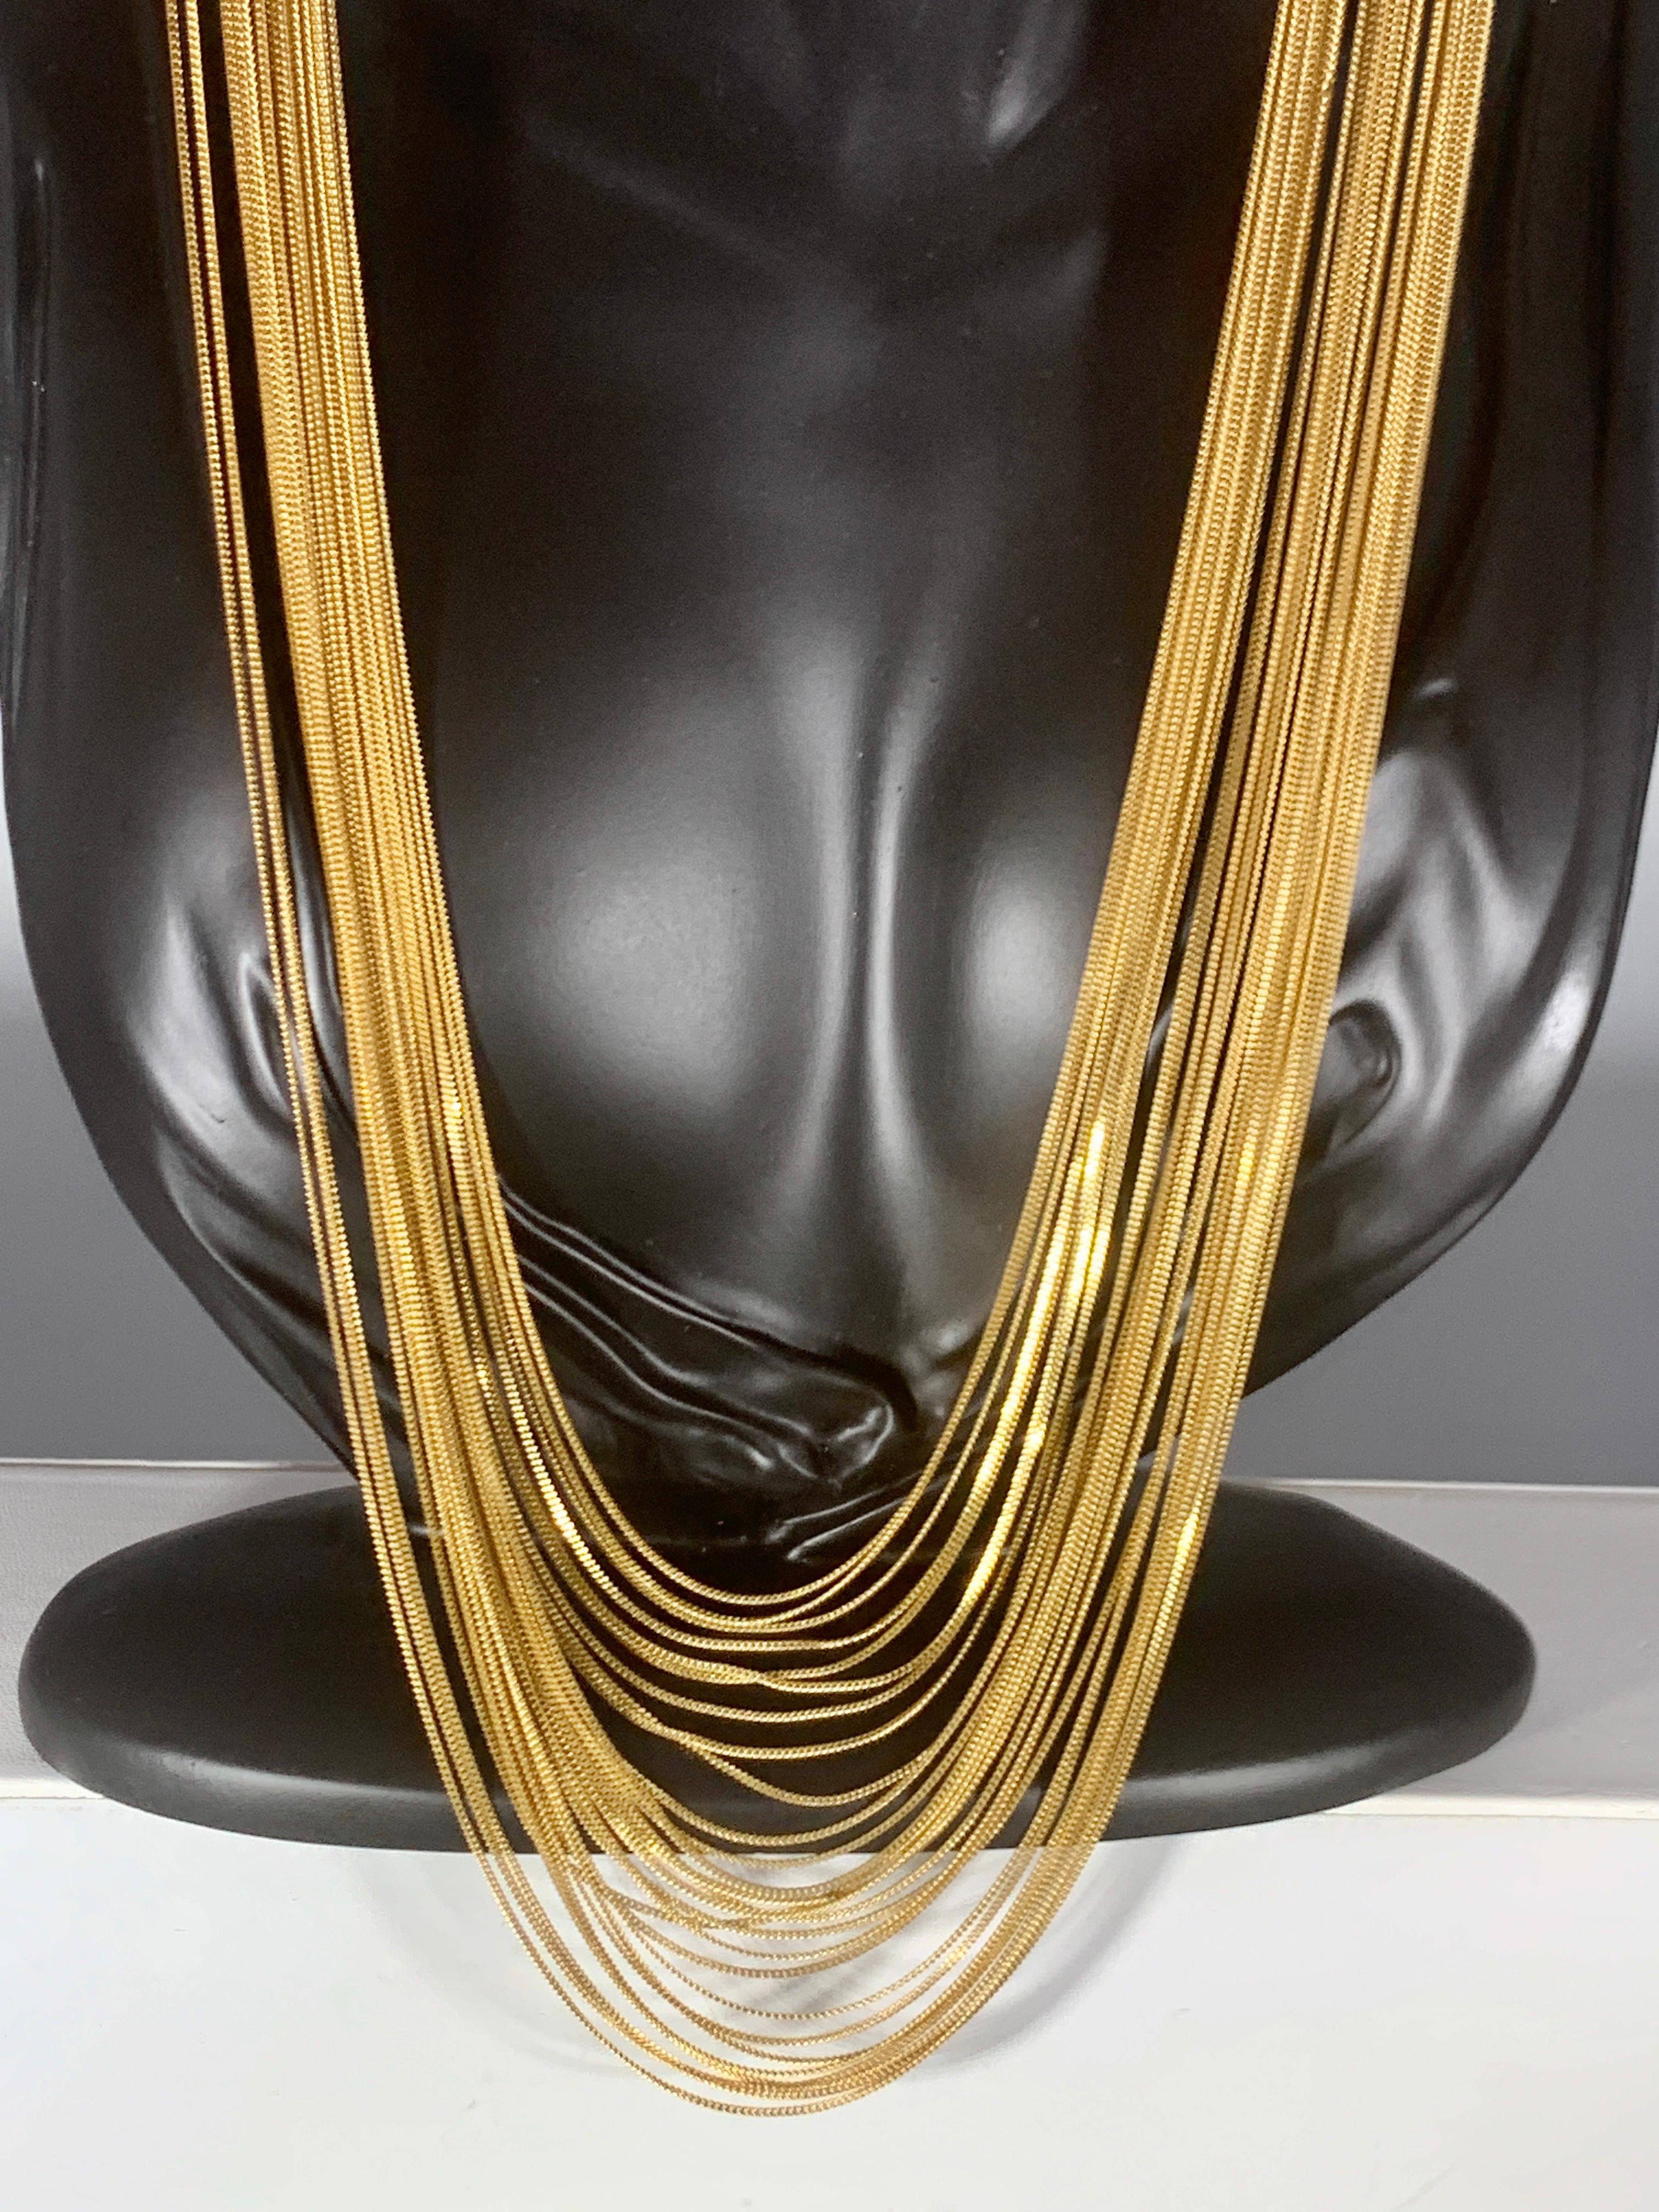 Gucci 18 Karat Gold Multi Strand Long Lariat Necklace Diamond Clasp, Antique In Excellent Condition For Sale In New York, NY